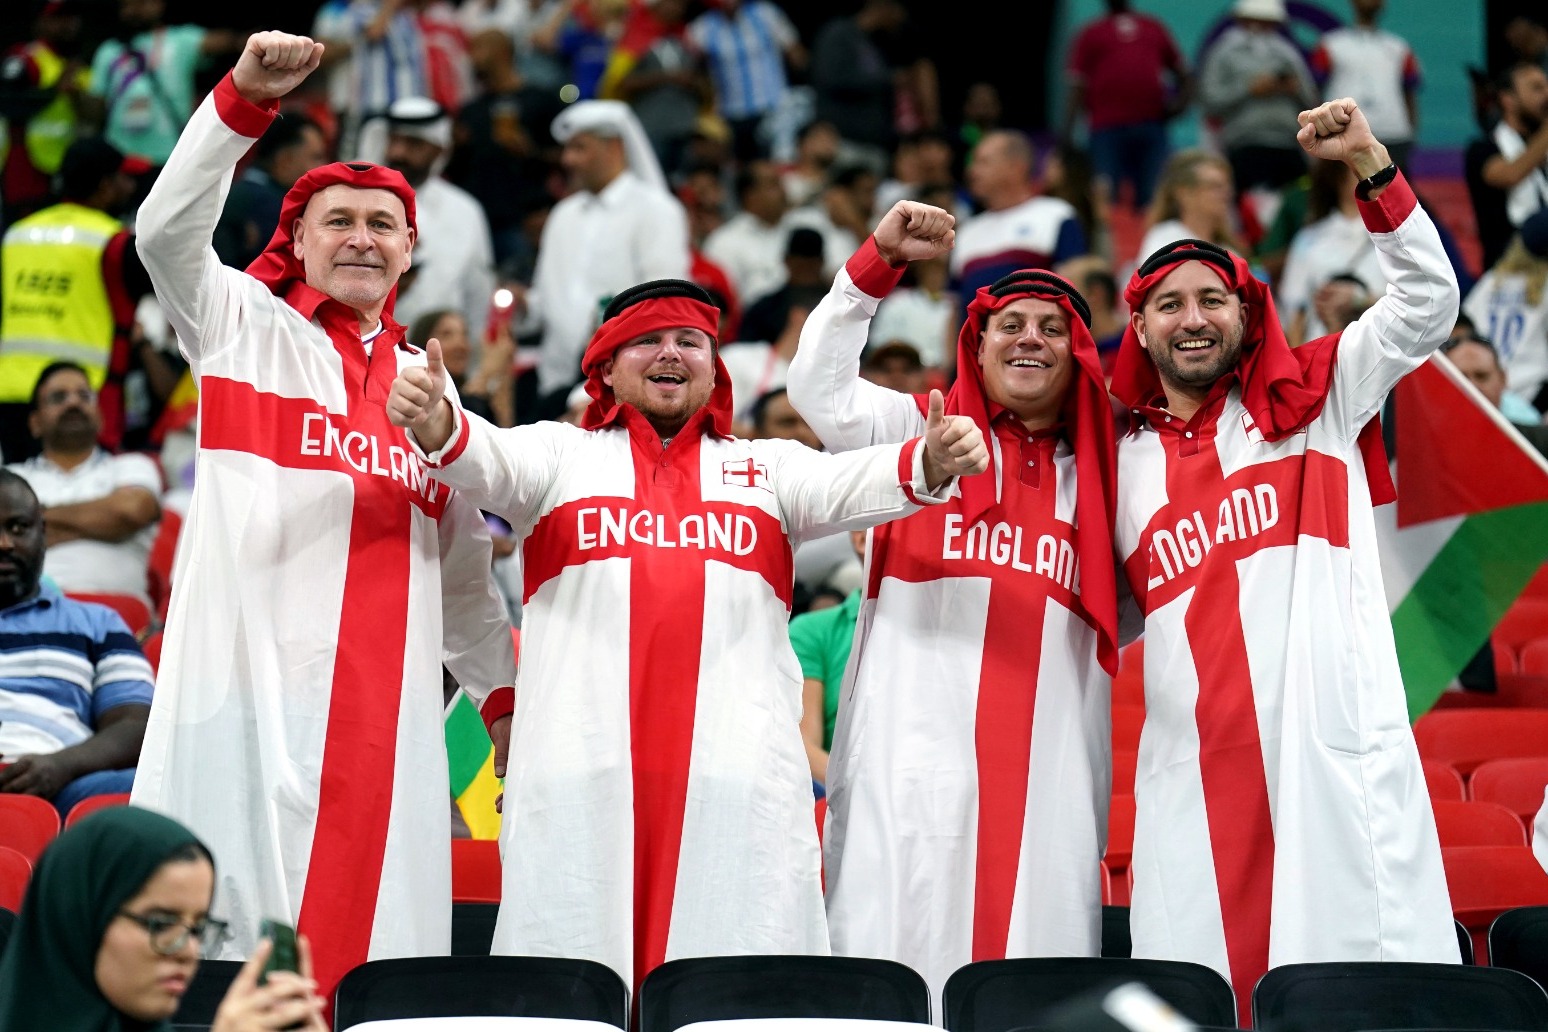 England and Wales fans praised for ‘exemplary’ behaviour at World Cup in Qatar 